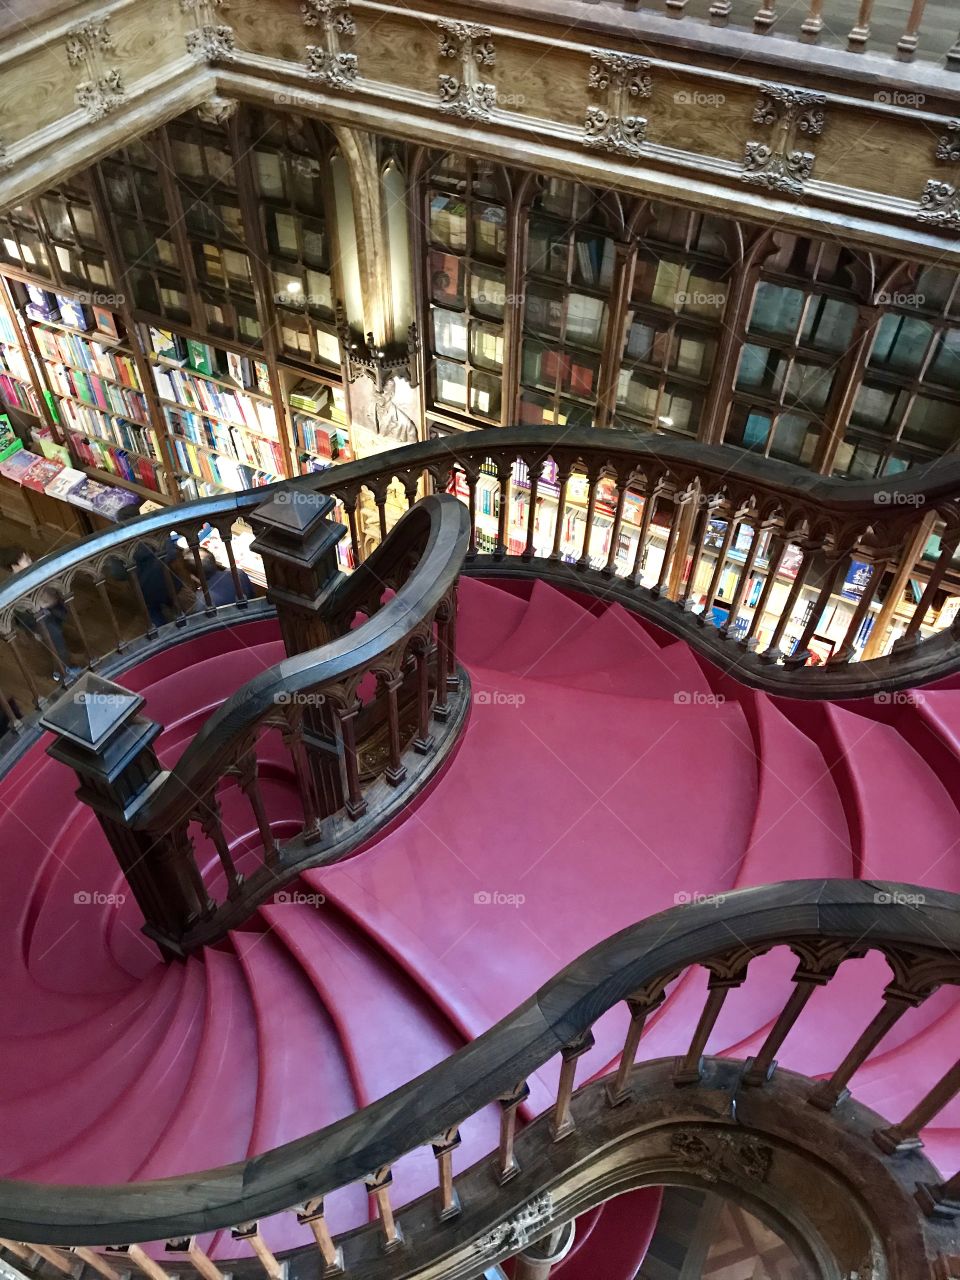 Famous Livraria Lello known to have inspired Harry Potter - Located in Porto, Portugal